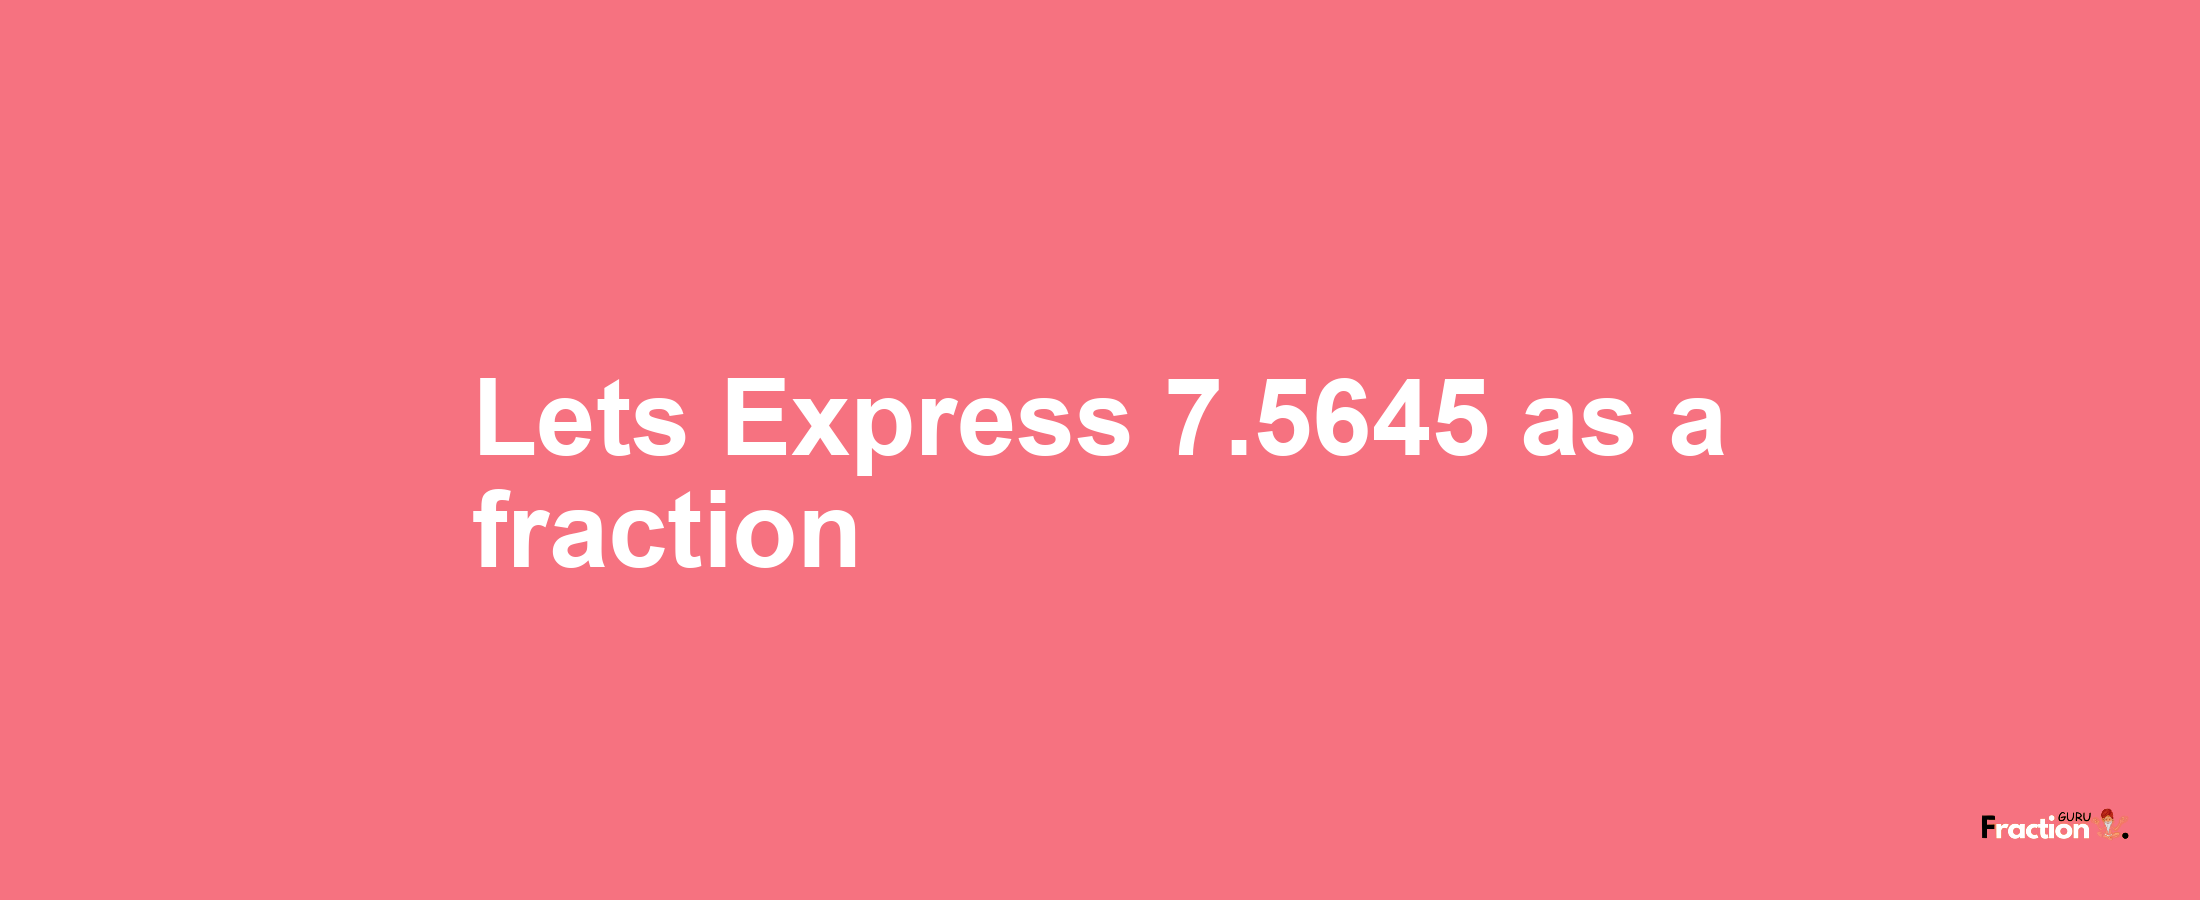 Lets Express 7.5645 as afraction